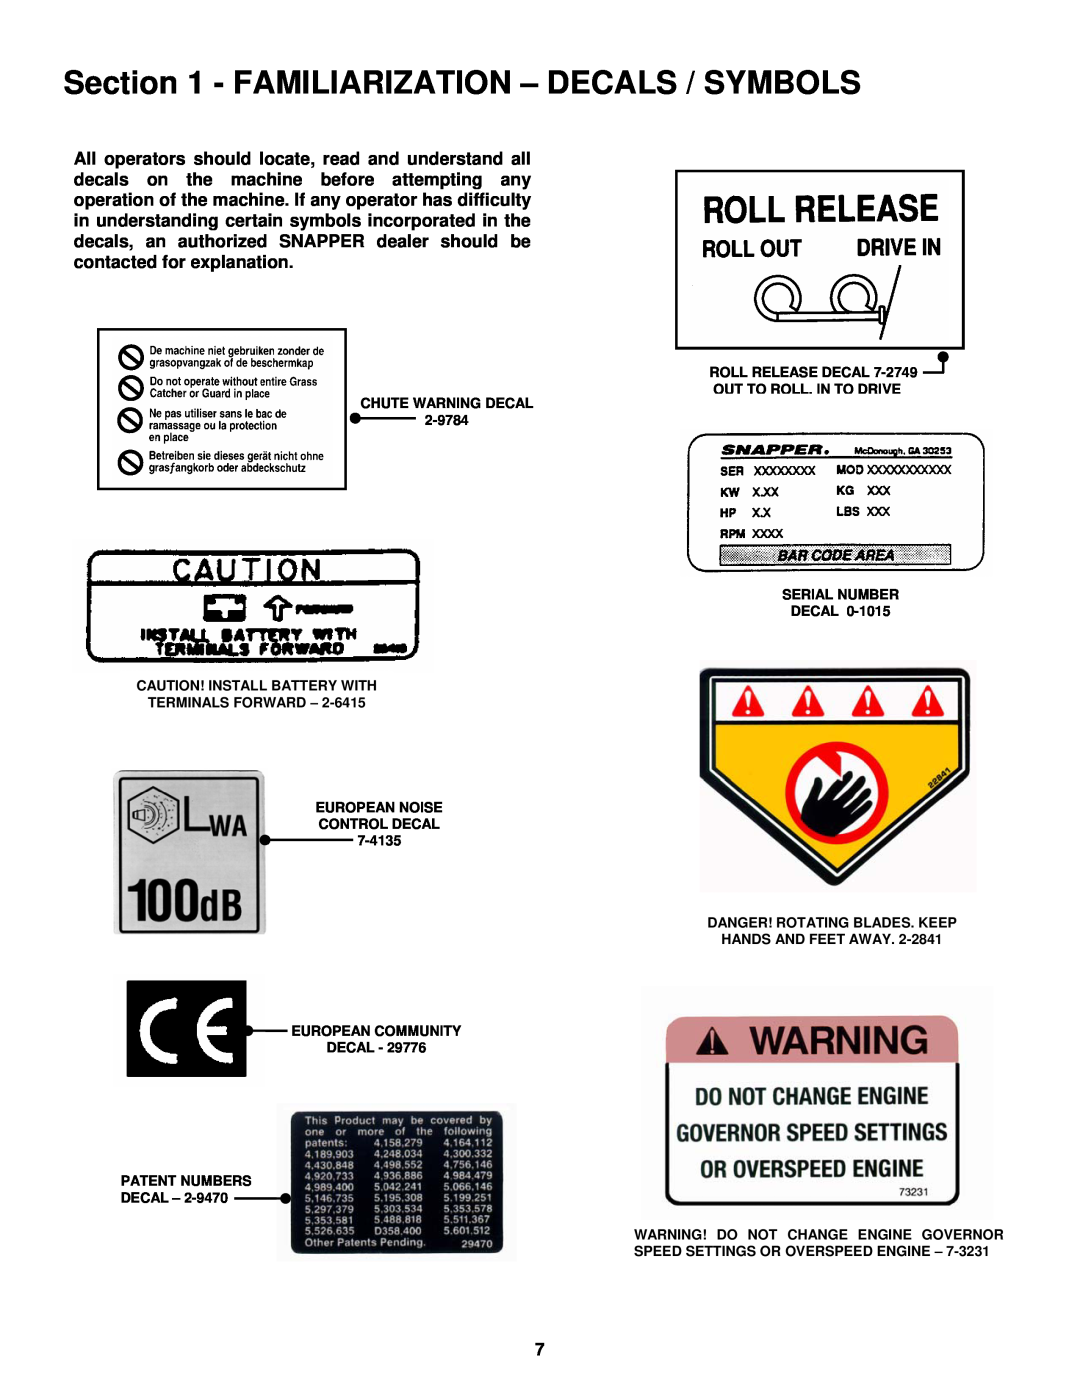 Snapper ELT180H33IBV important safety instructions Familiarization - Decals / Symbols 